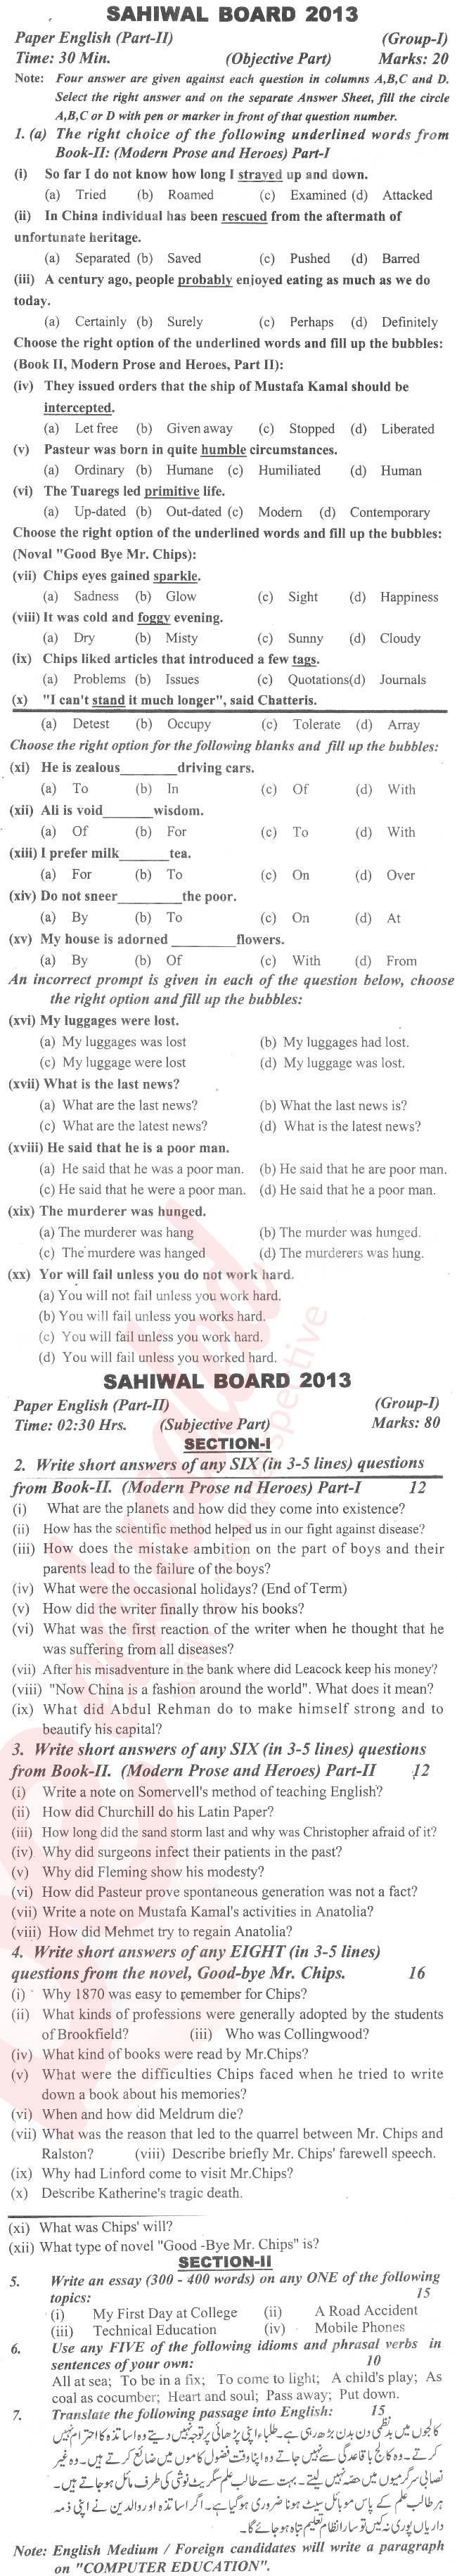 English 12th class Past Paper Group 1 BISE Sahiwal 2013